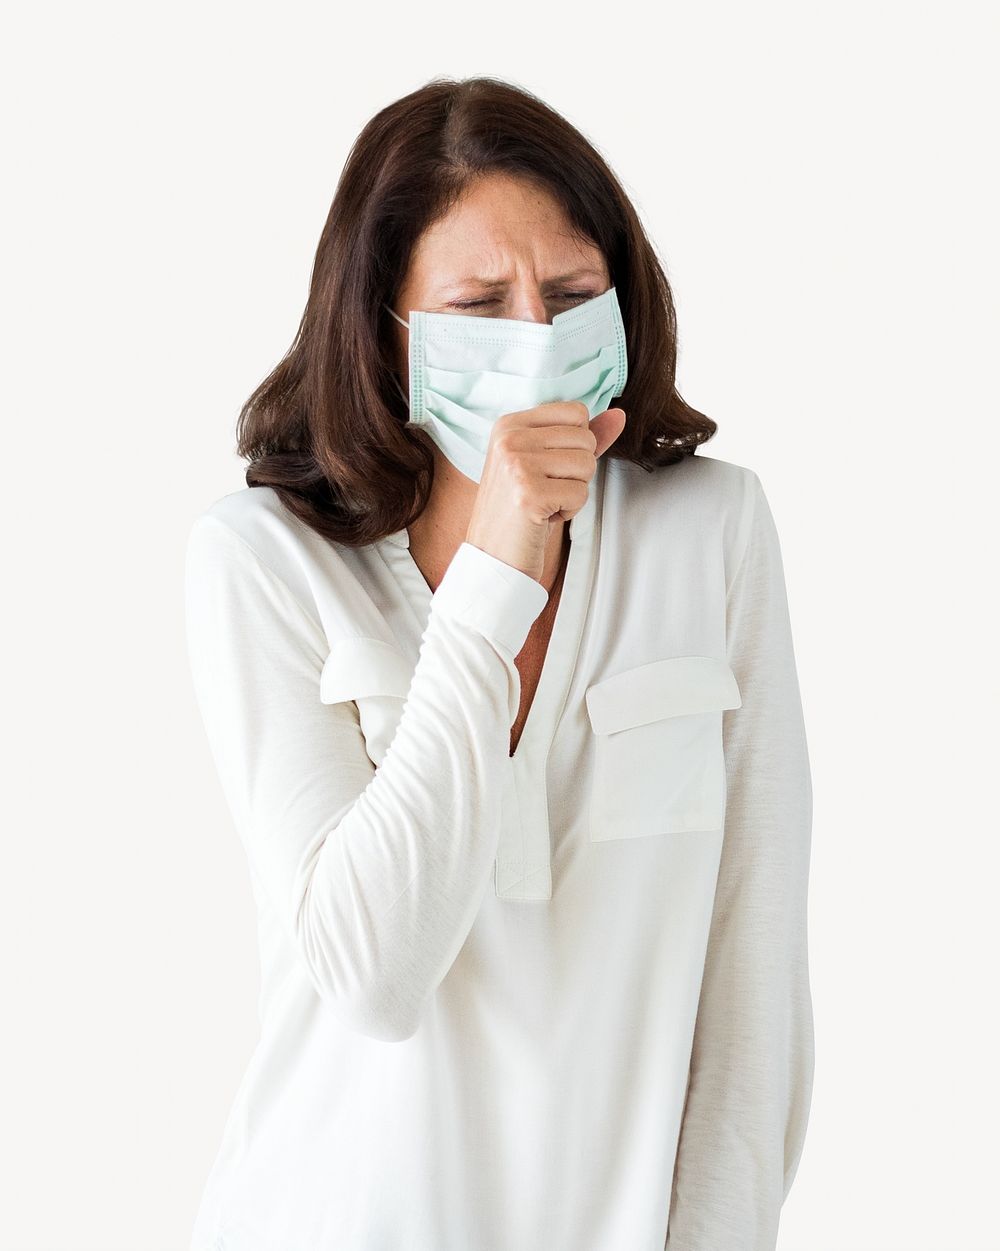 Coughing woman isolated image